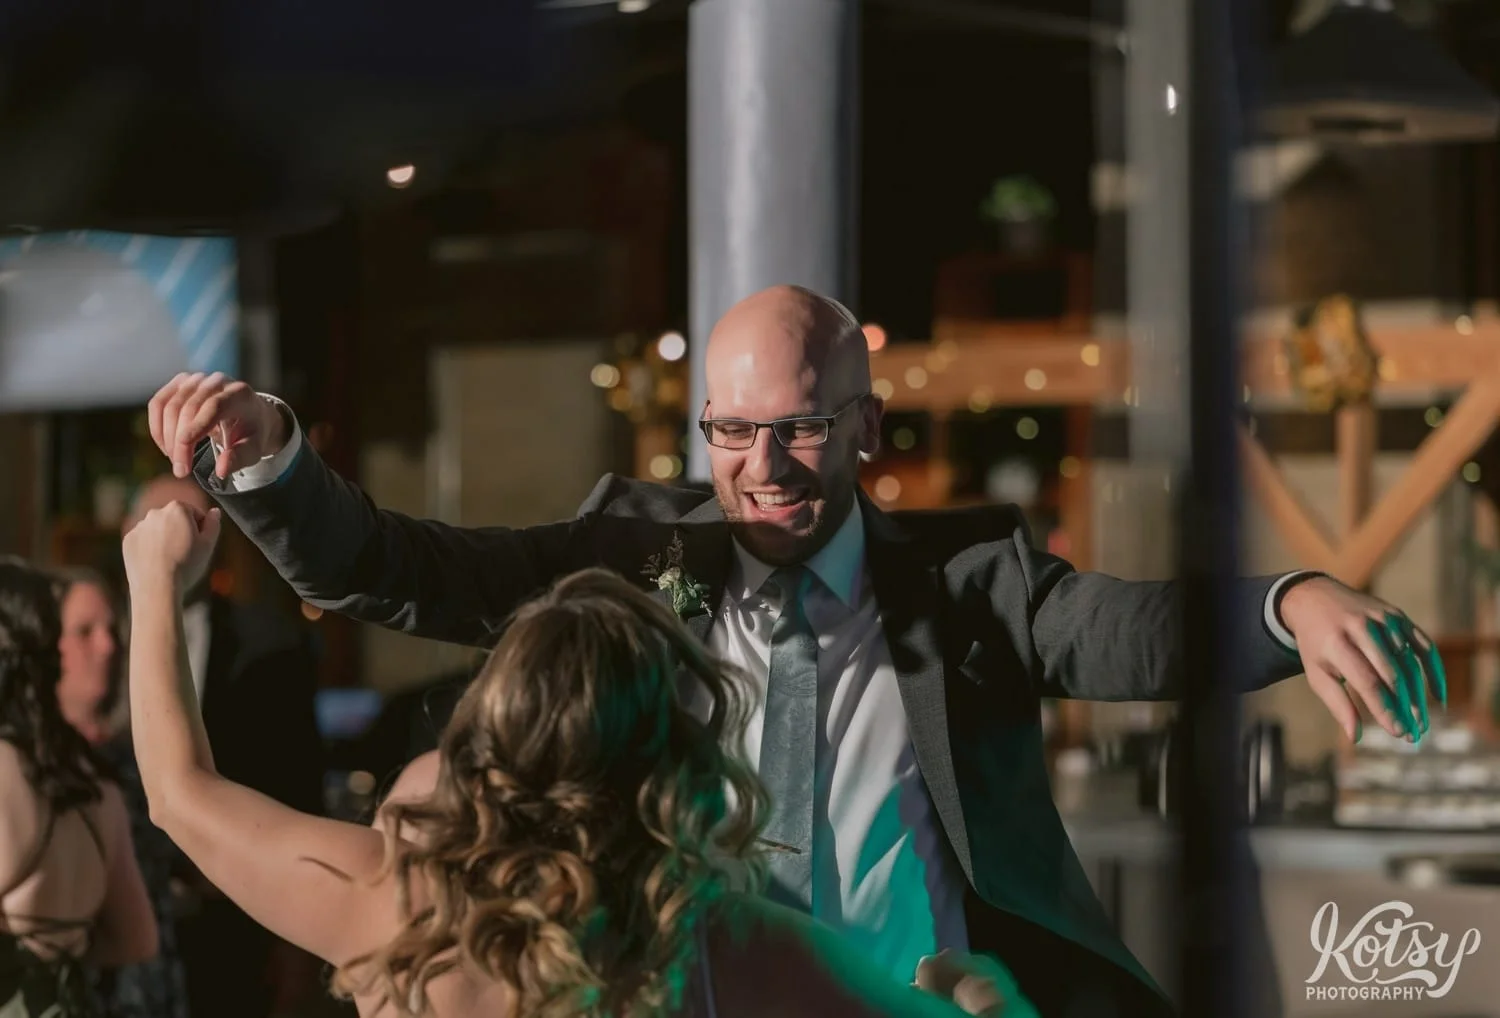 A groom and a gray suit and green tie is seen with his arms up dancing in front of his bride during their Second Floor Events wedding reception in Toronto, Canada.